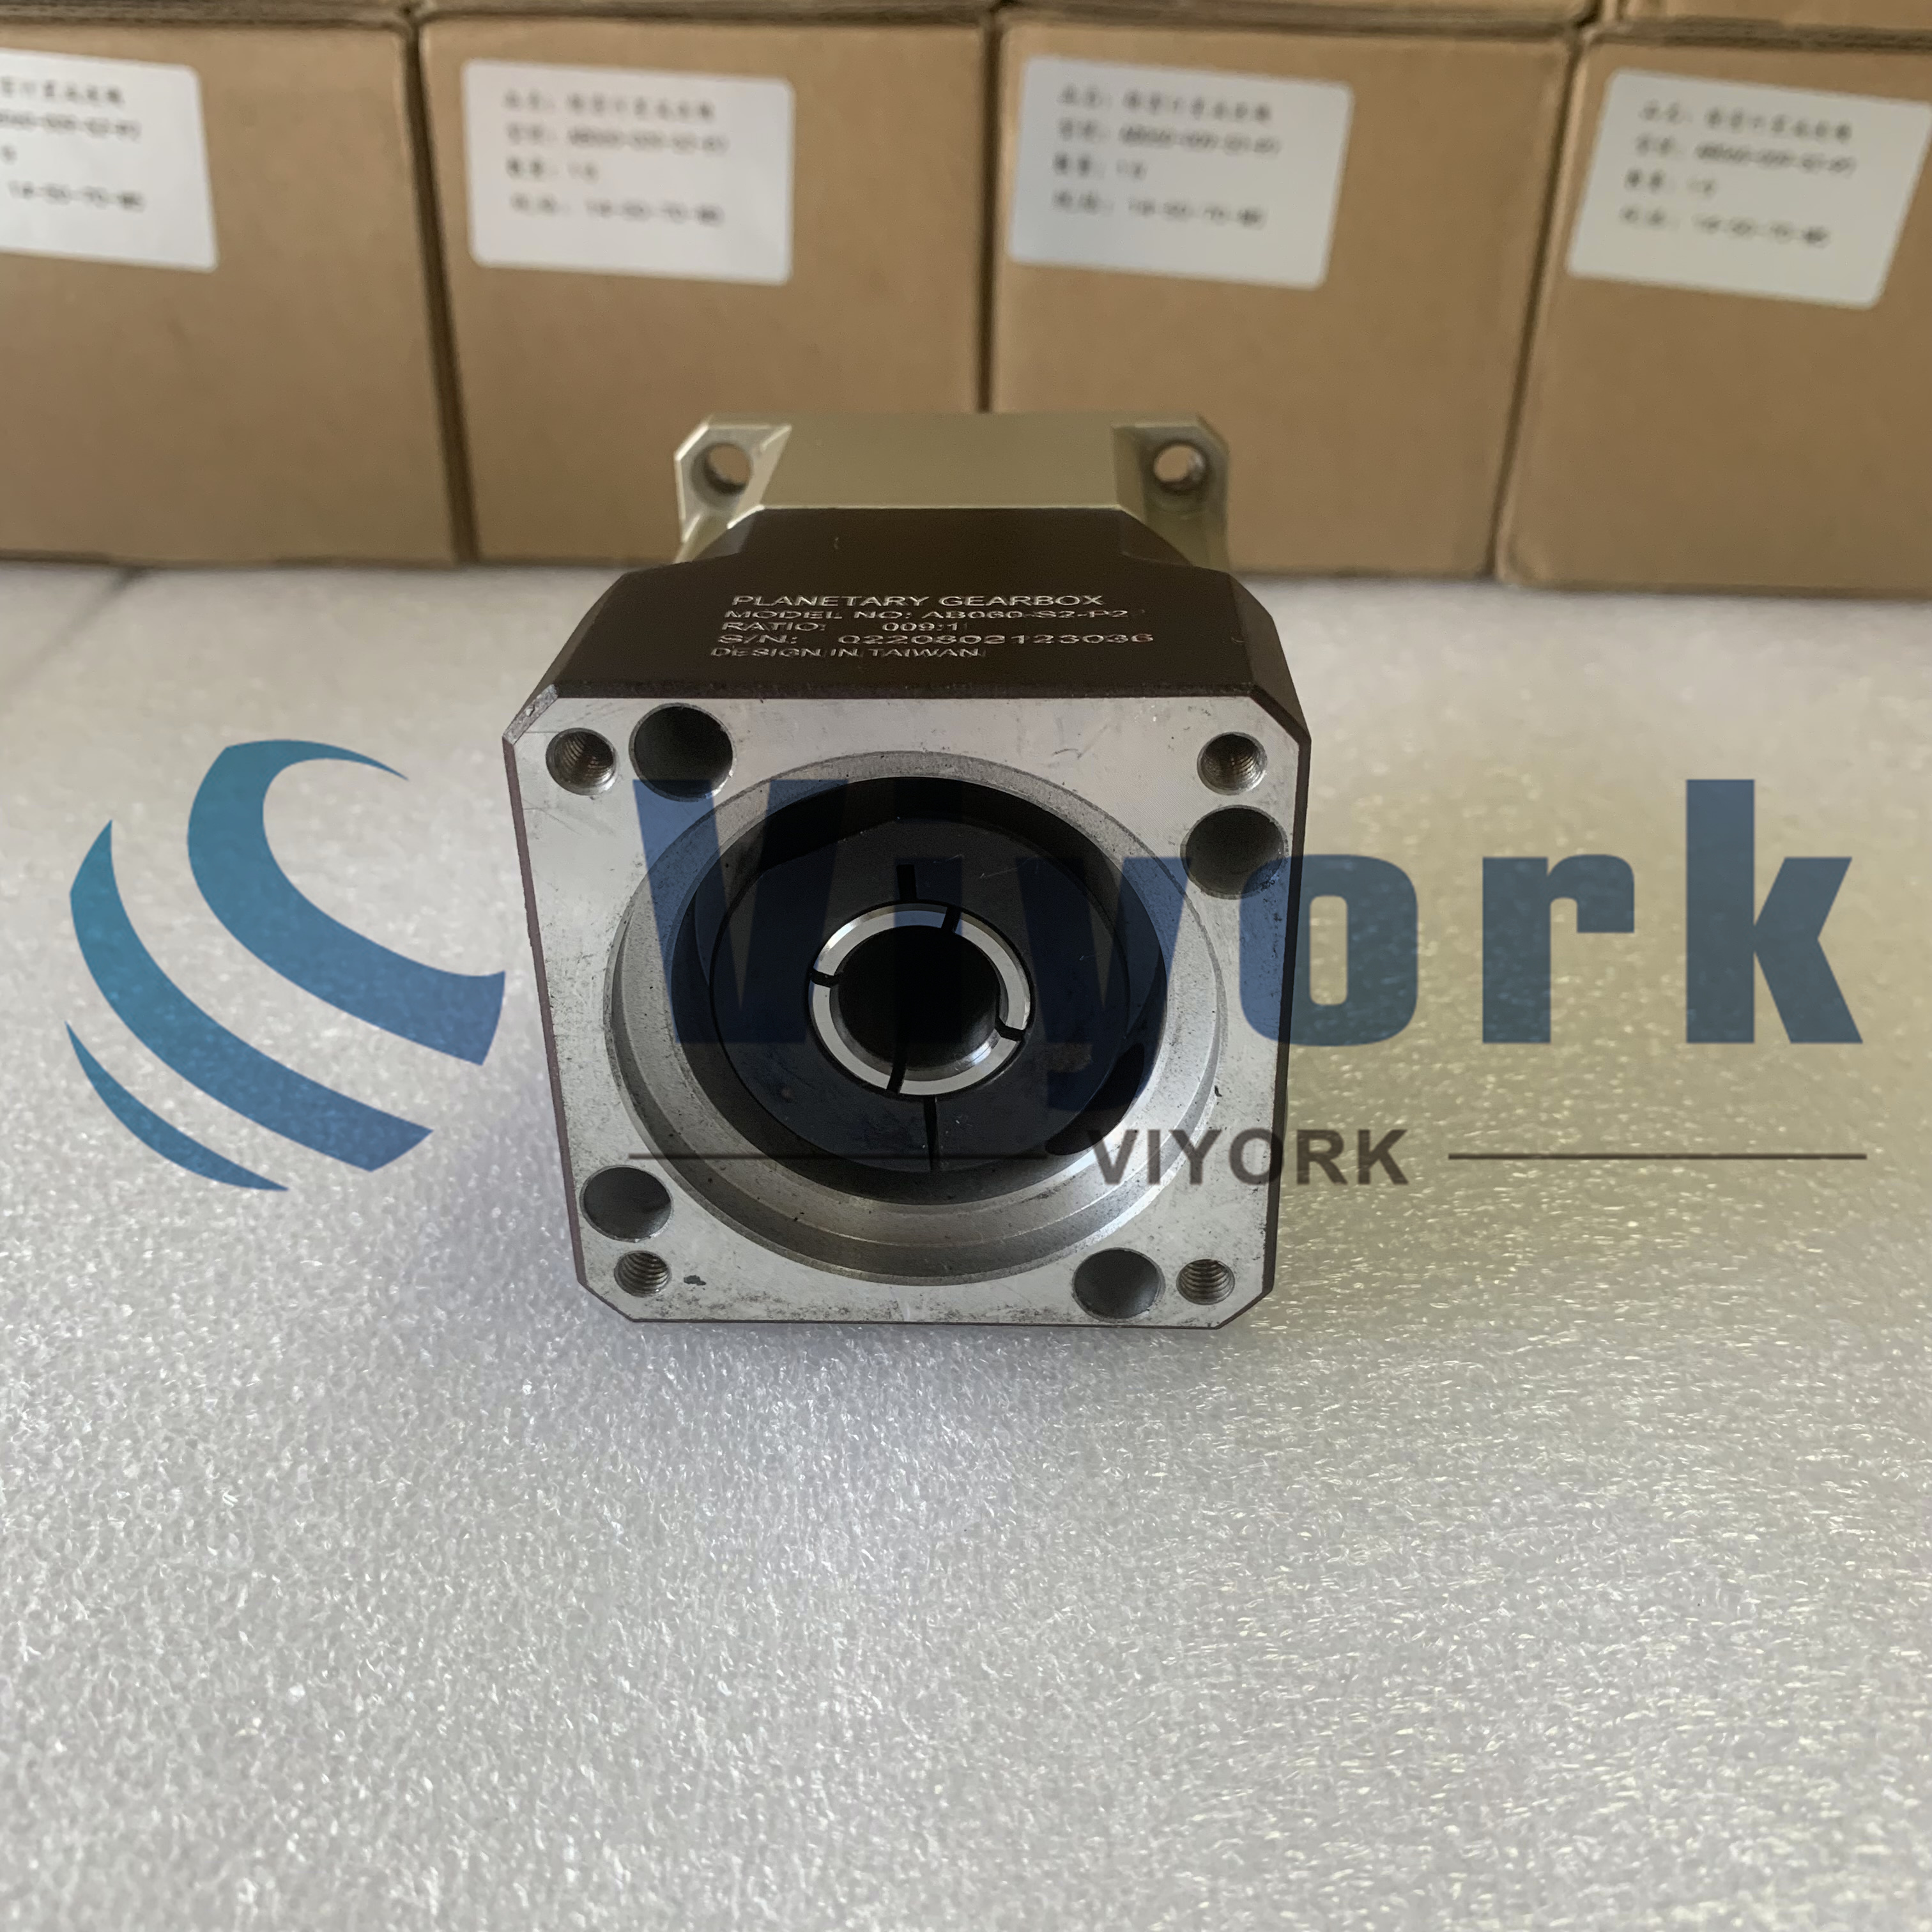 APEX AB060-009-S2-P2 GEAR MOTOR WITH GEAR RATIO 1:9 NEW AND MADE IN CHINA